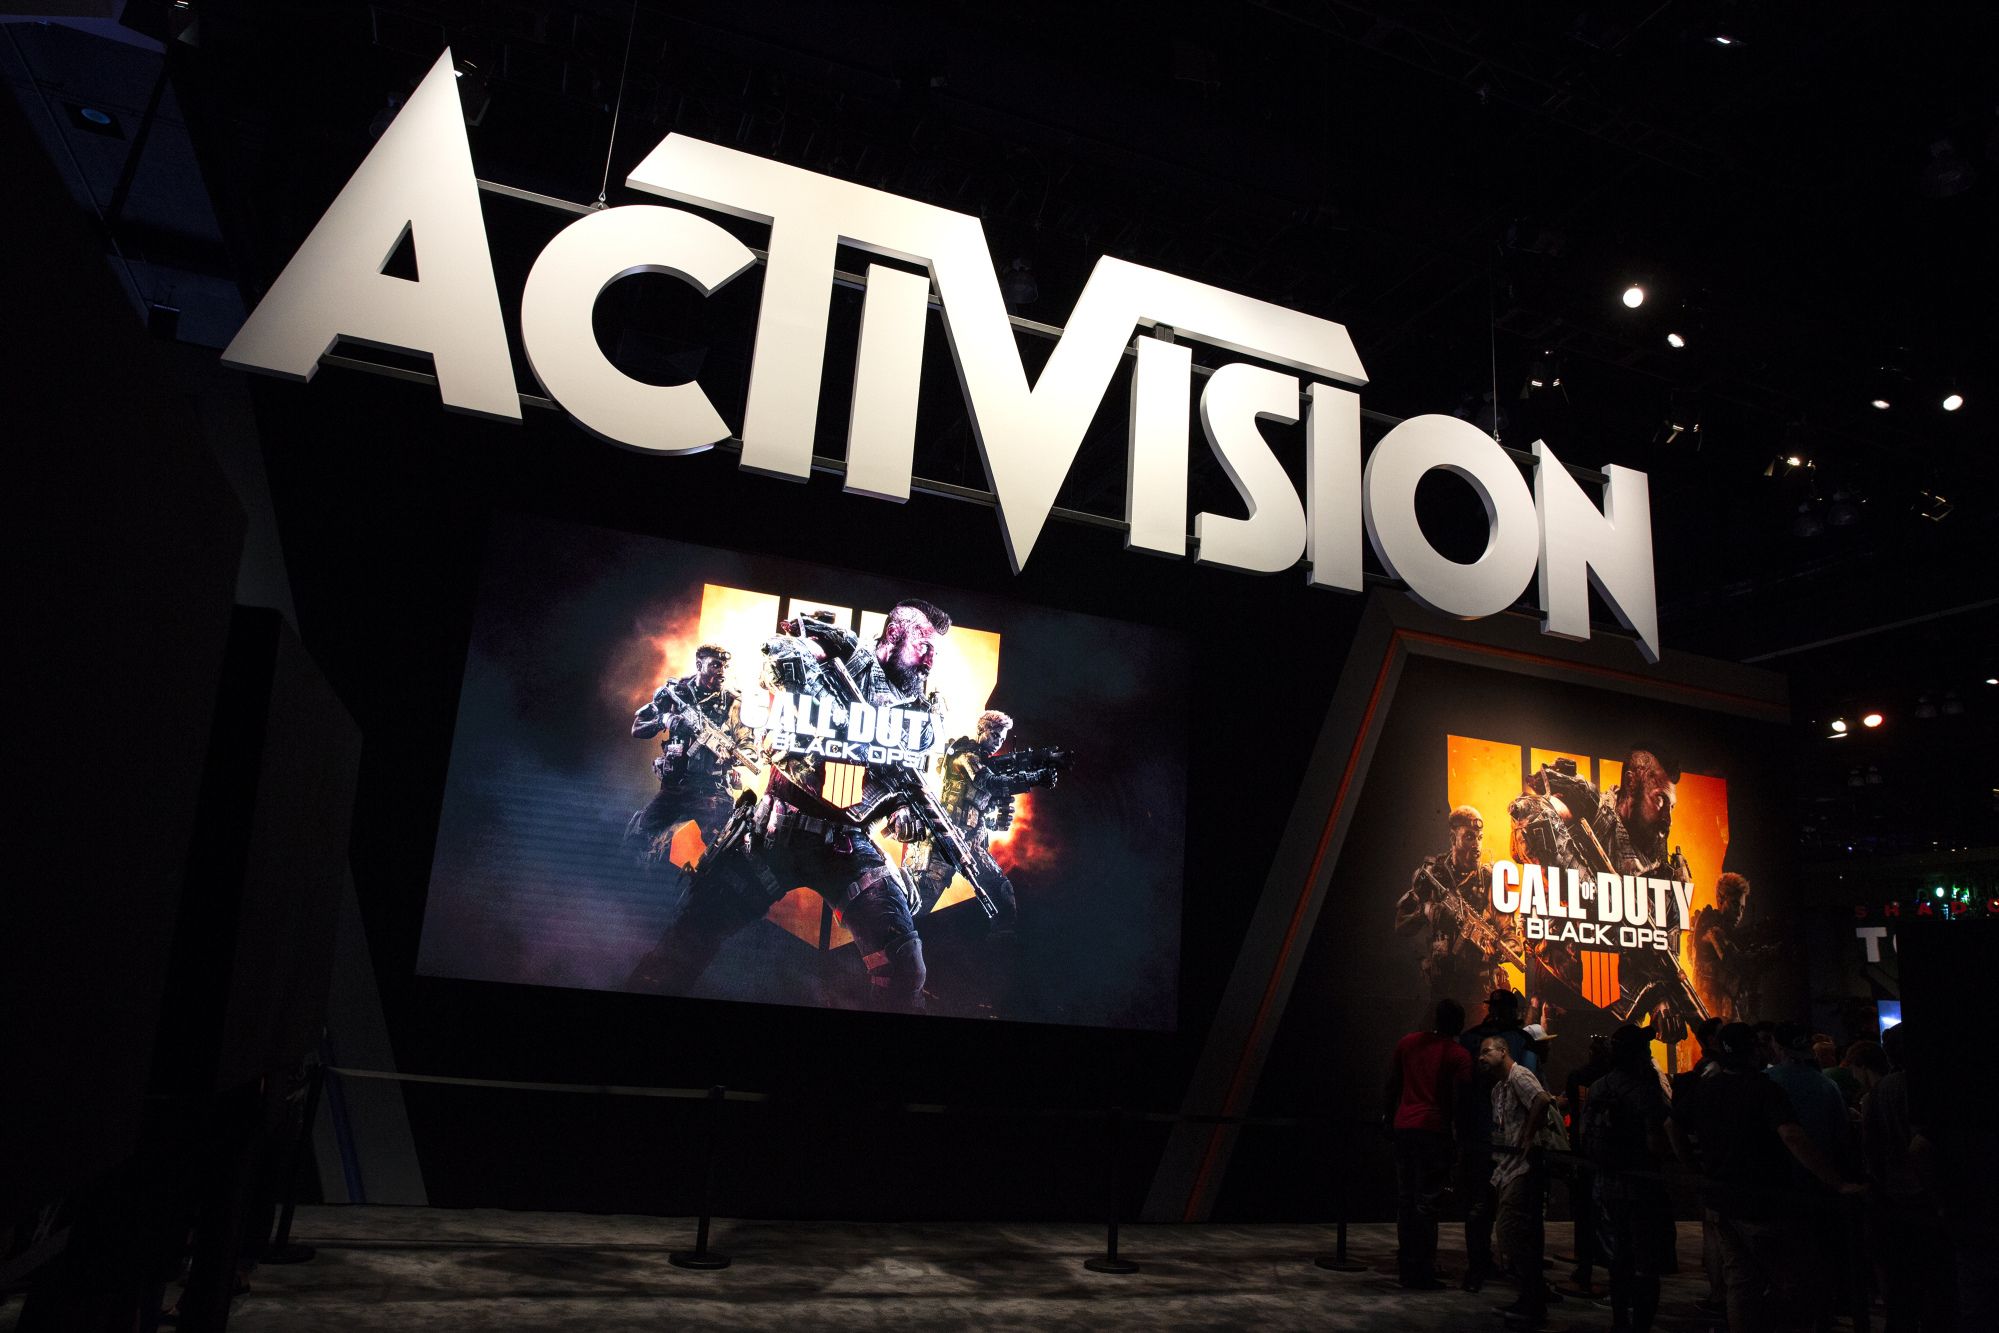 In 2019, The State Of Activision-Blizzard Is Not Strong